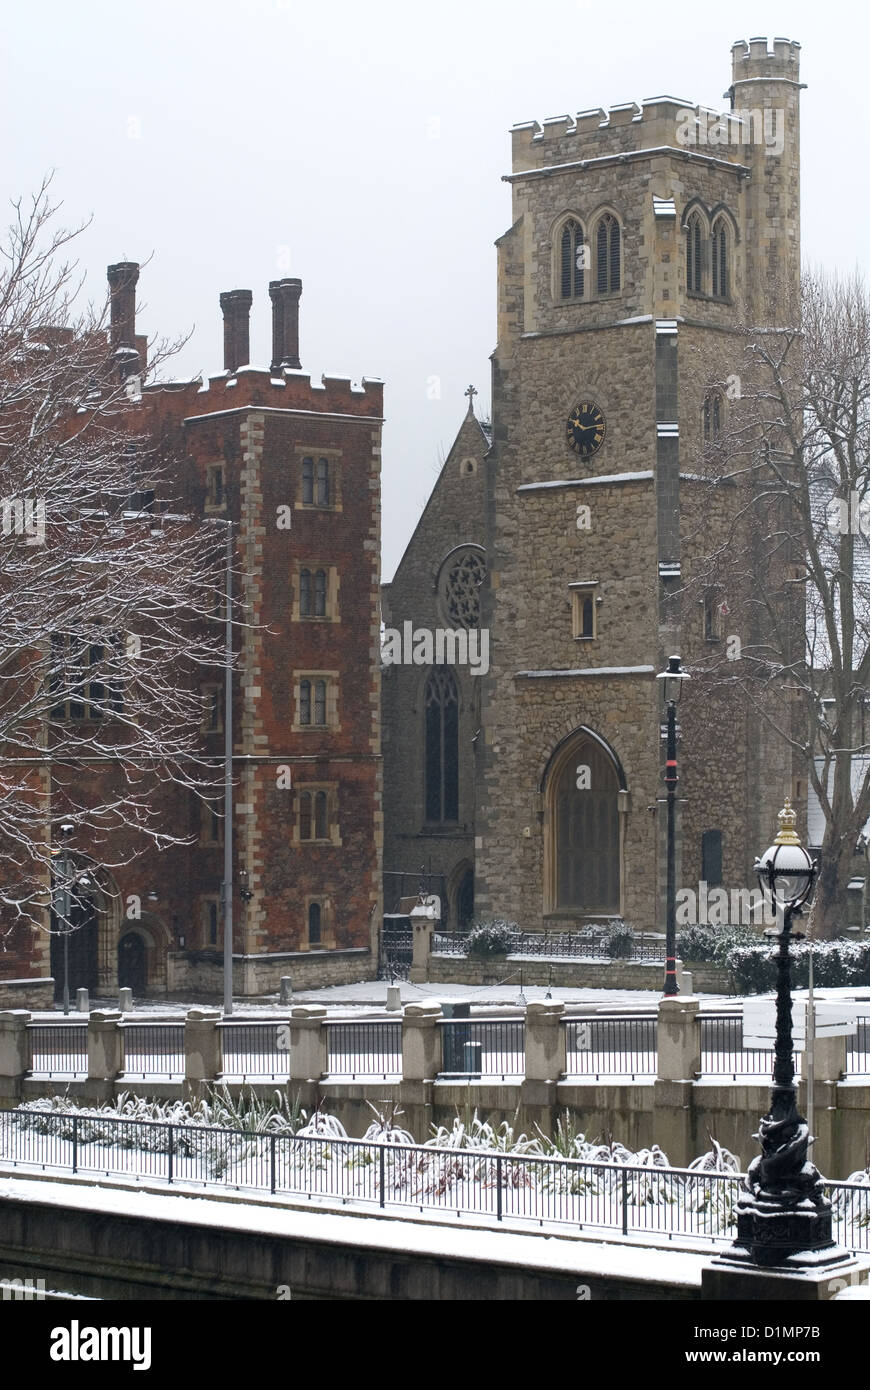 Lambeth Palace, Morton's Gate, the River Thames, and street scene, on a cold, snowy day, London, England Stock Photo